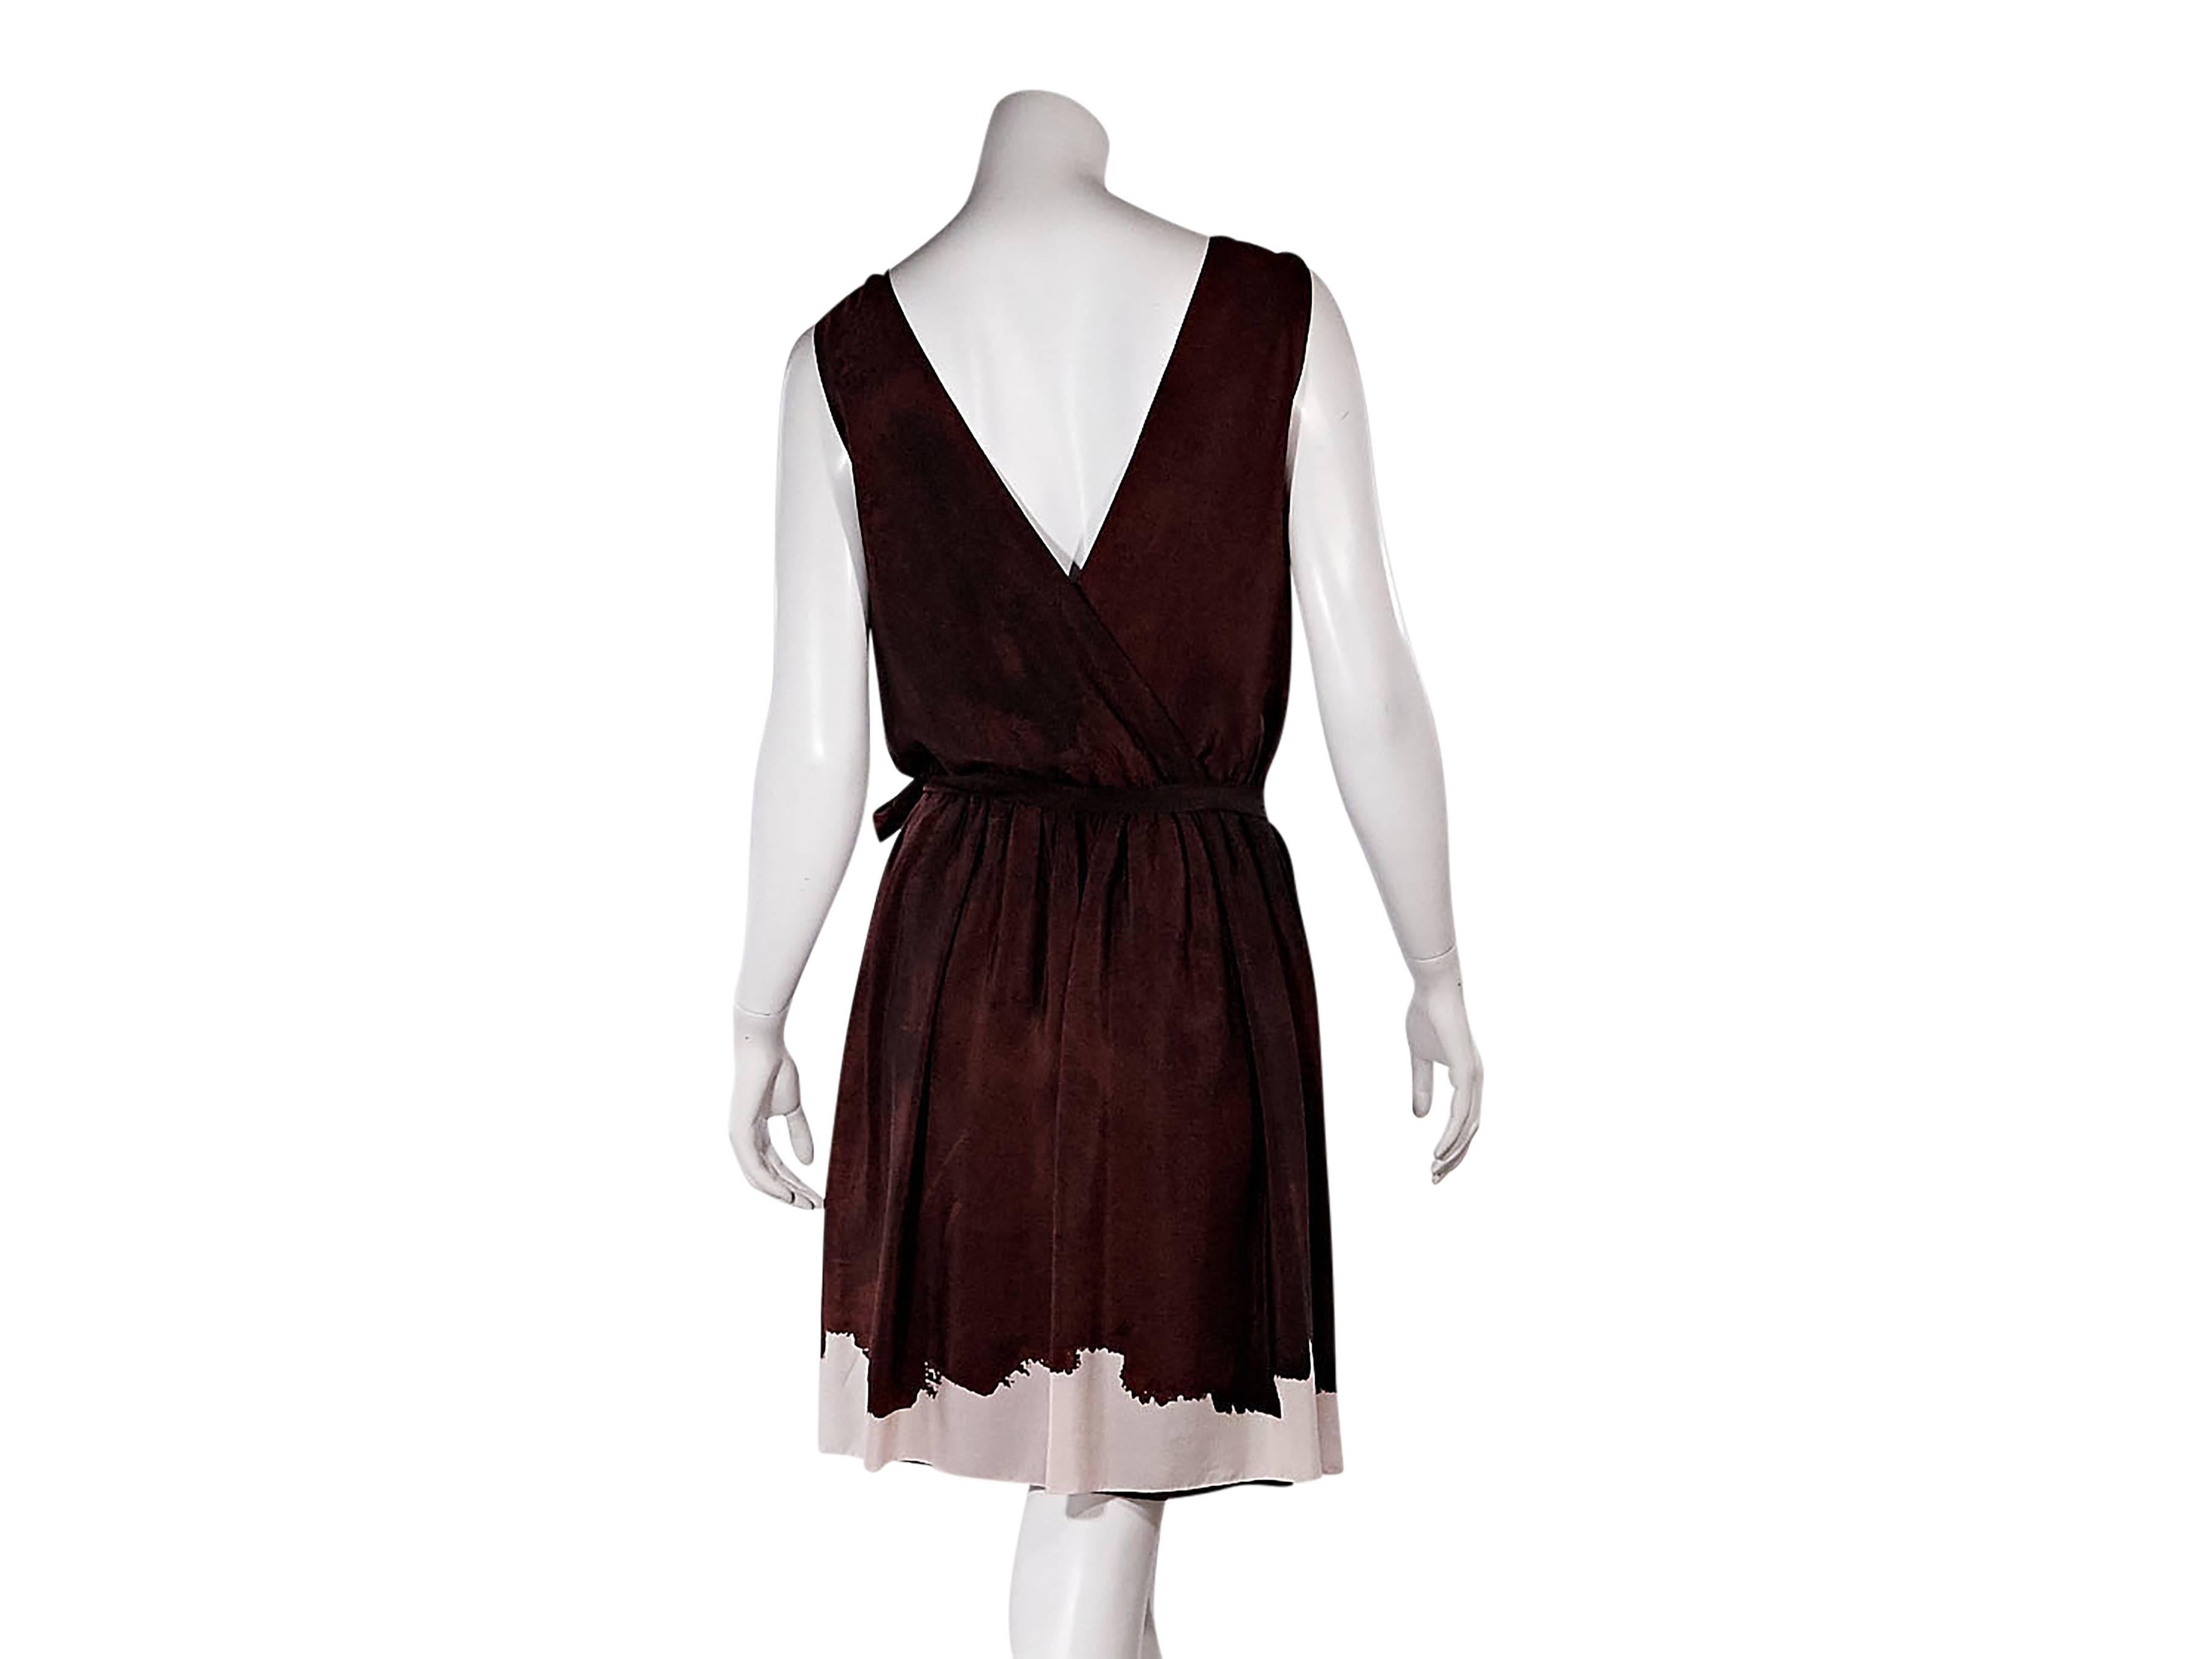 Product details:  Burgundy silk wrap dress by Thakoon.  V-neck.  Sleeveless.  Bow accents at shoulders.  Pleated skirting.  Crossover back.  Pink dip-dyed hem. Size 8
Condition: Pre-owned. Very good.

Est. Retail $ 998.00